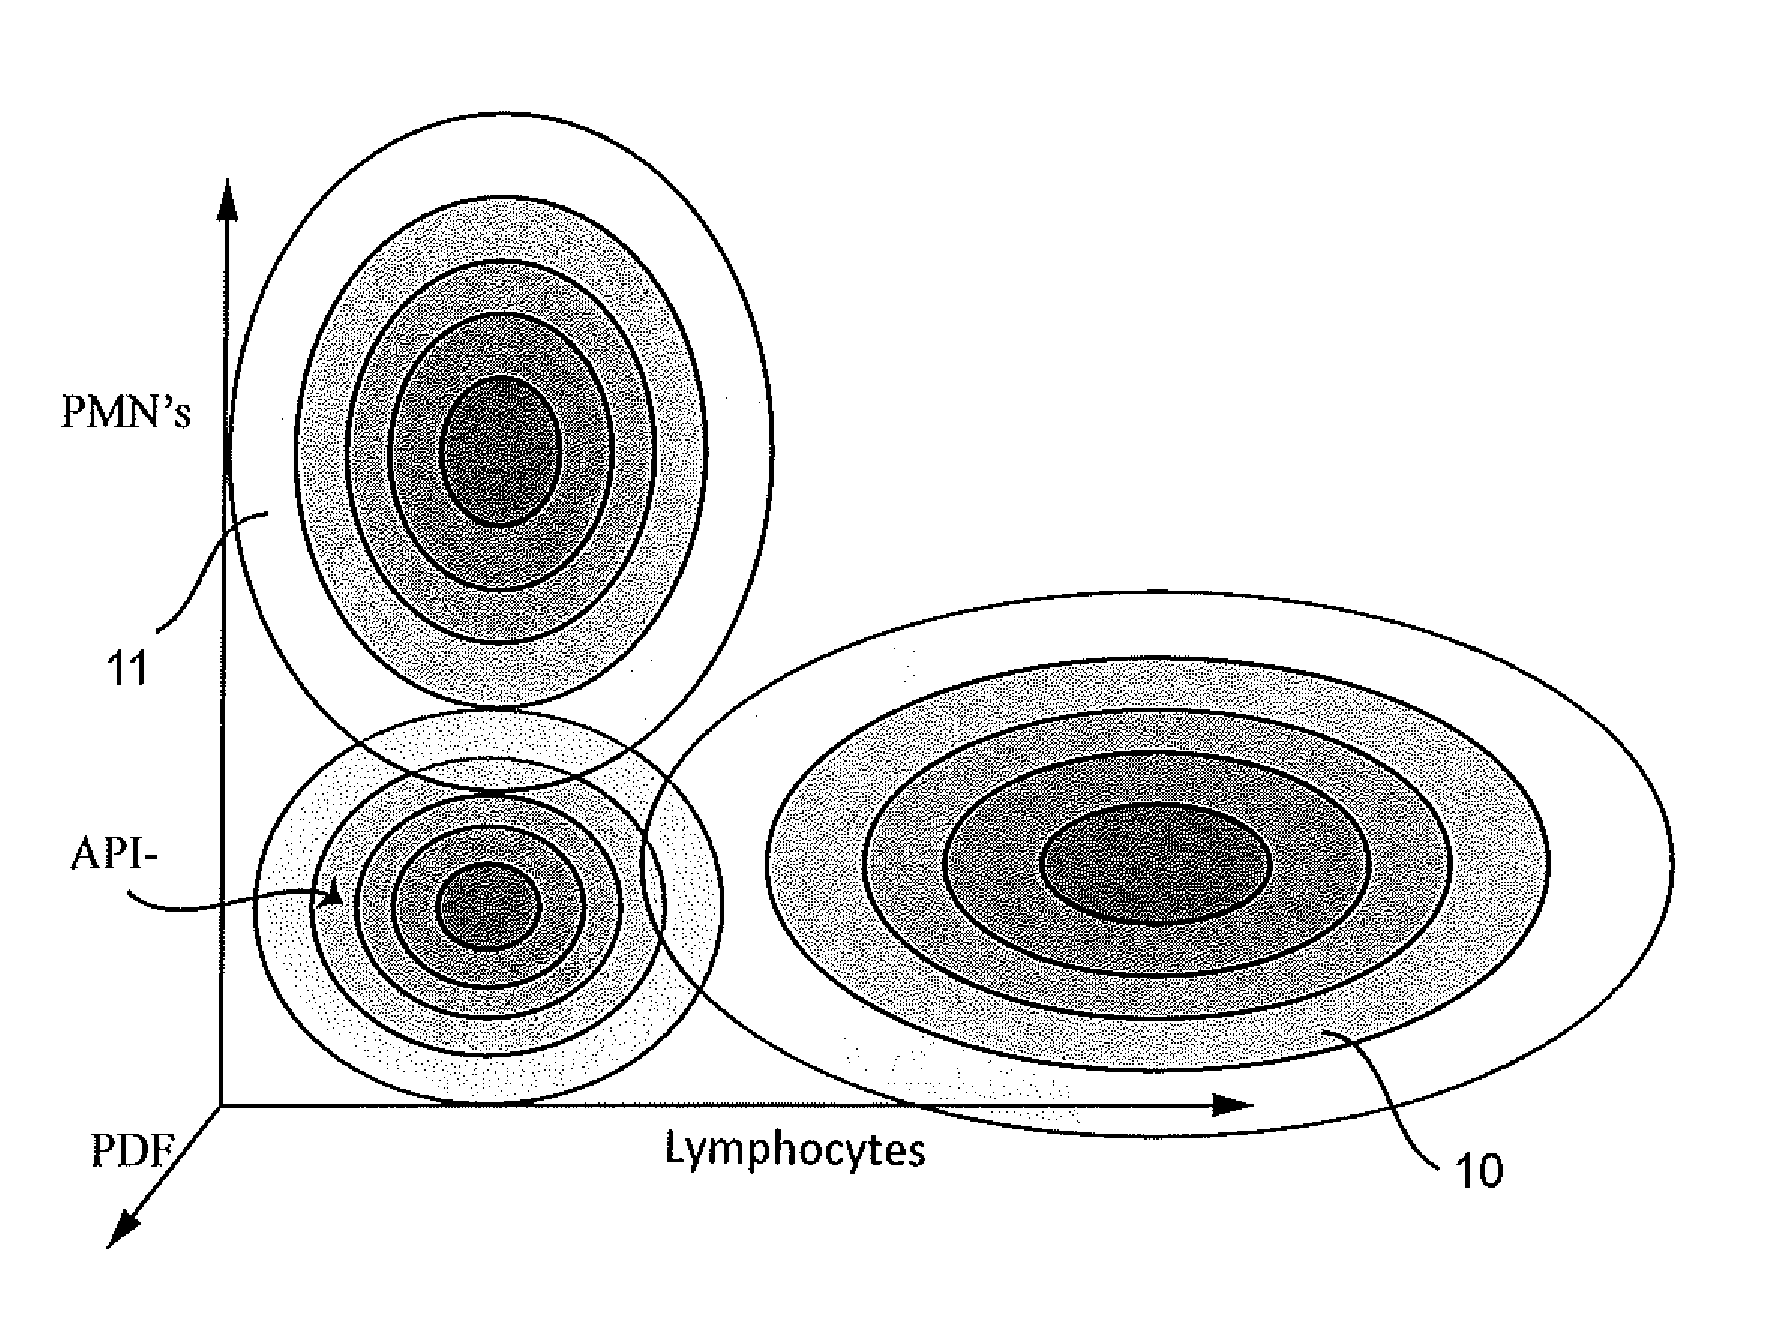 Method and Apparatus for the Biopsy and Diagnosis of Precancerous Inflammation and Crohn's Inflammatory Bowel Disease